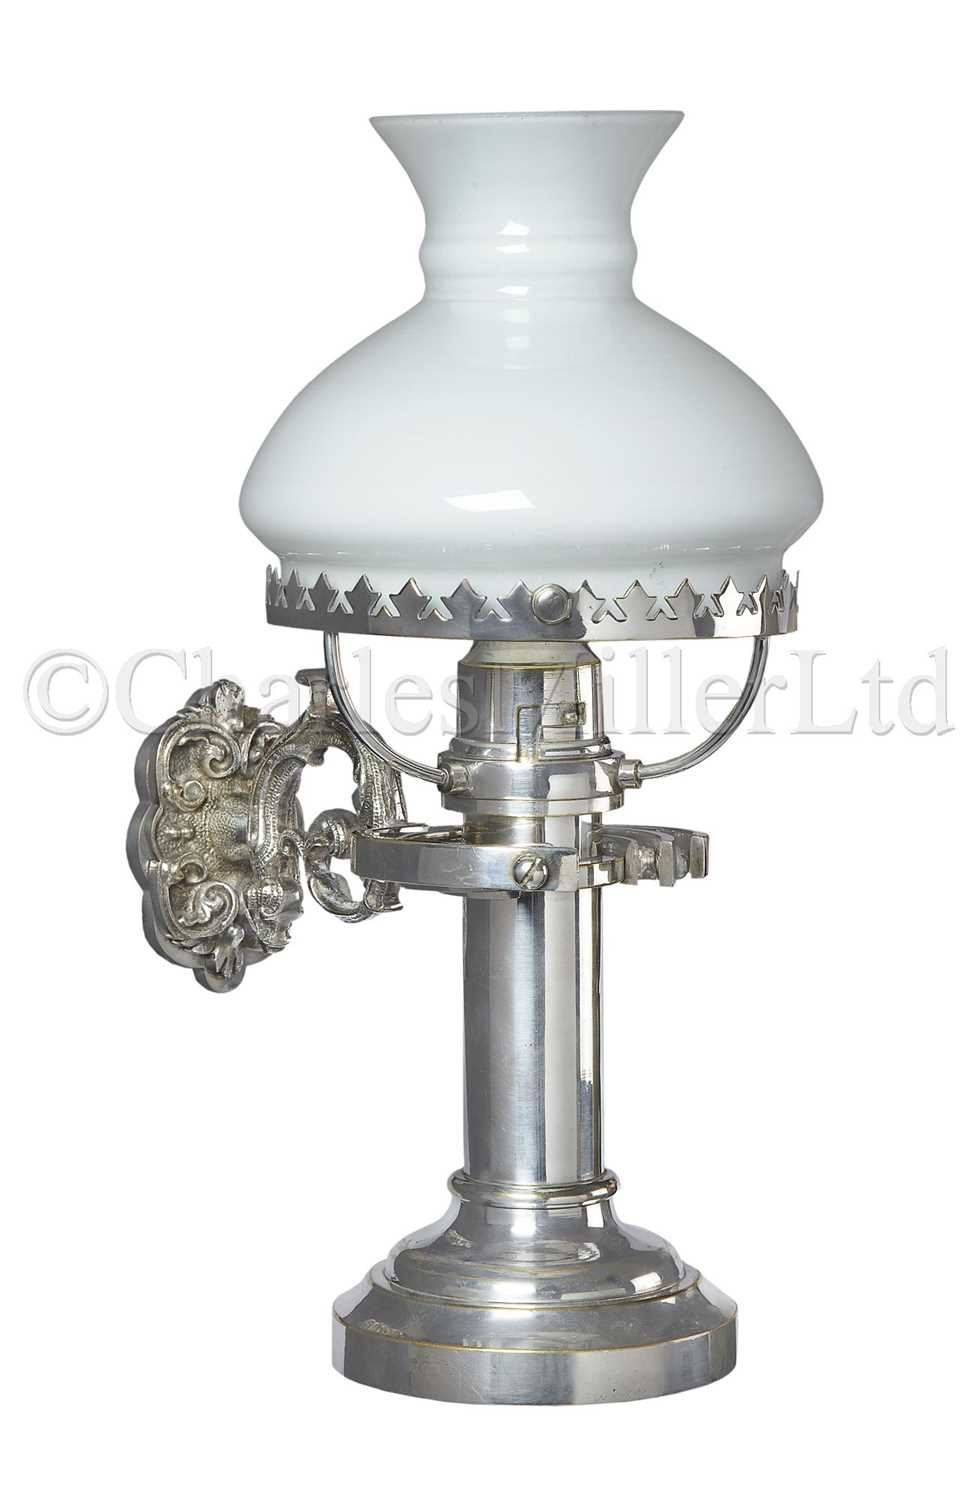 Lot 34 - A FINE 19TH CENTURY NICKEL-PLATED GIMBALLED CANDLE LAMP